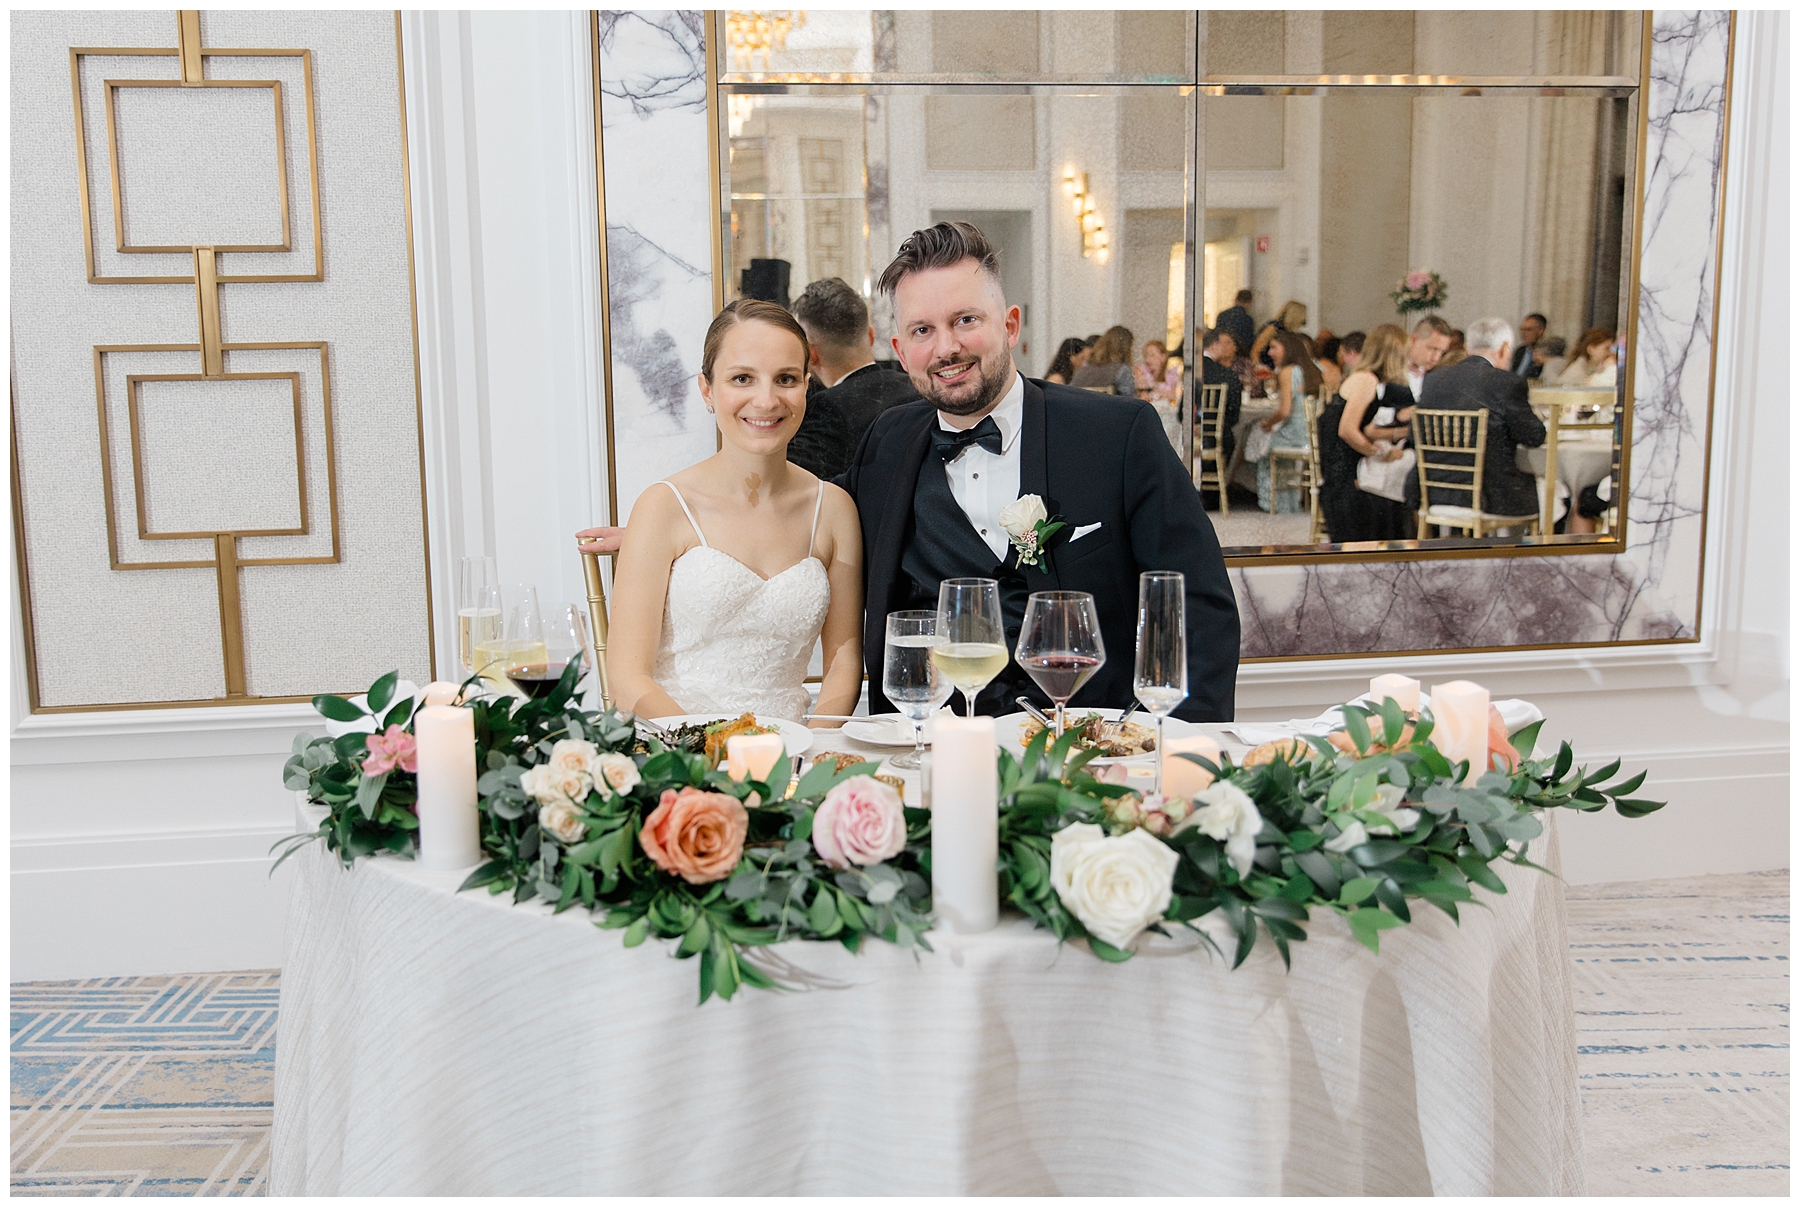 newlyweds at sweetheart table